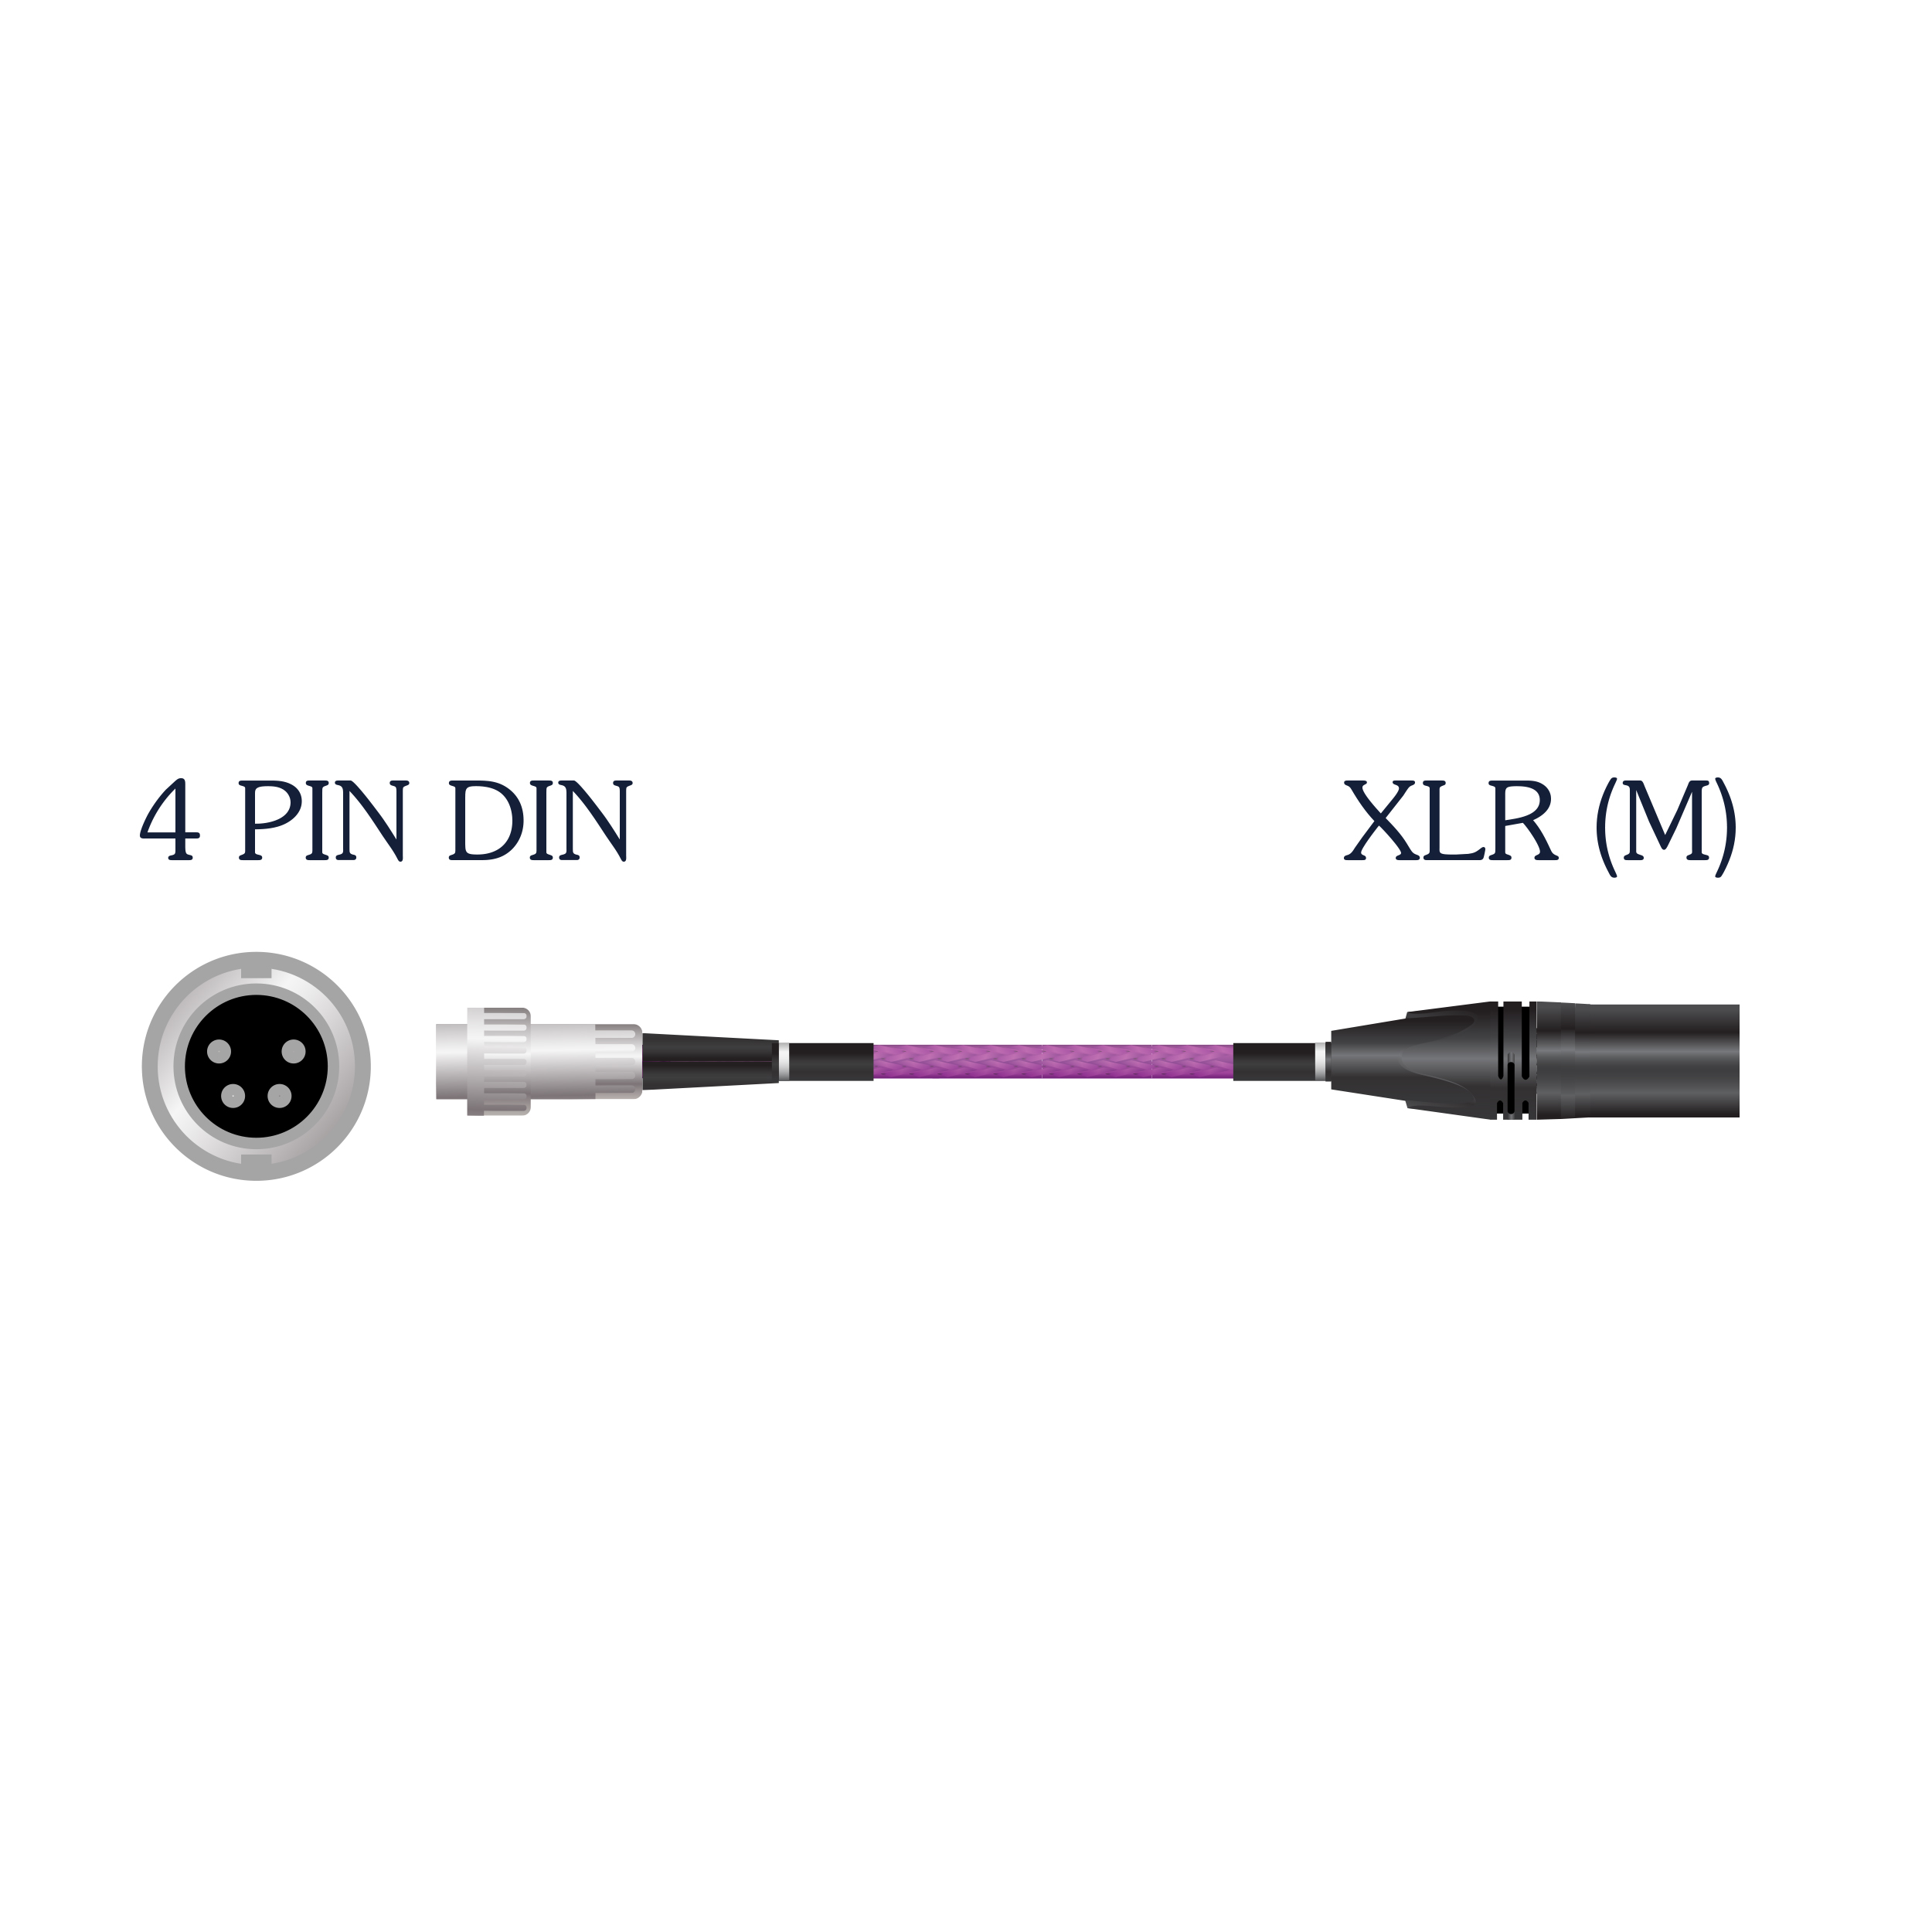 <p align="center">Frey 2 Specialty 4 Pin DIN To XLR (M) Cable</p>